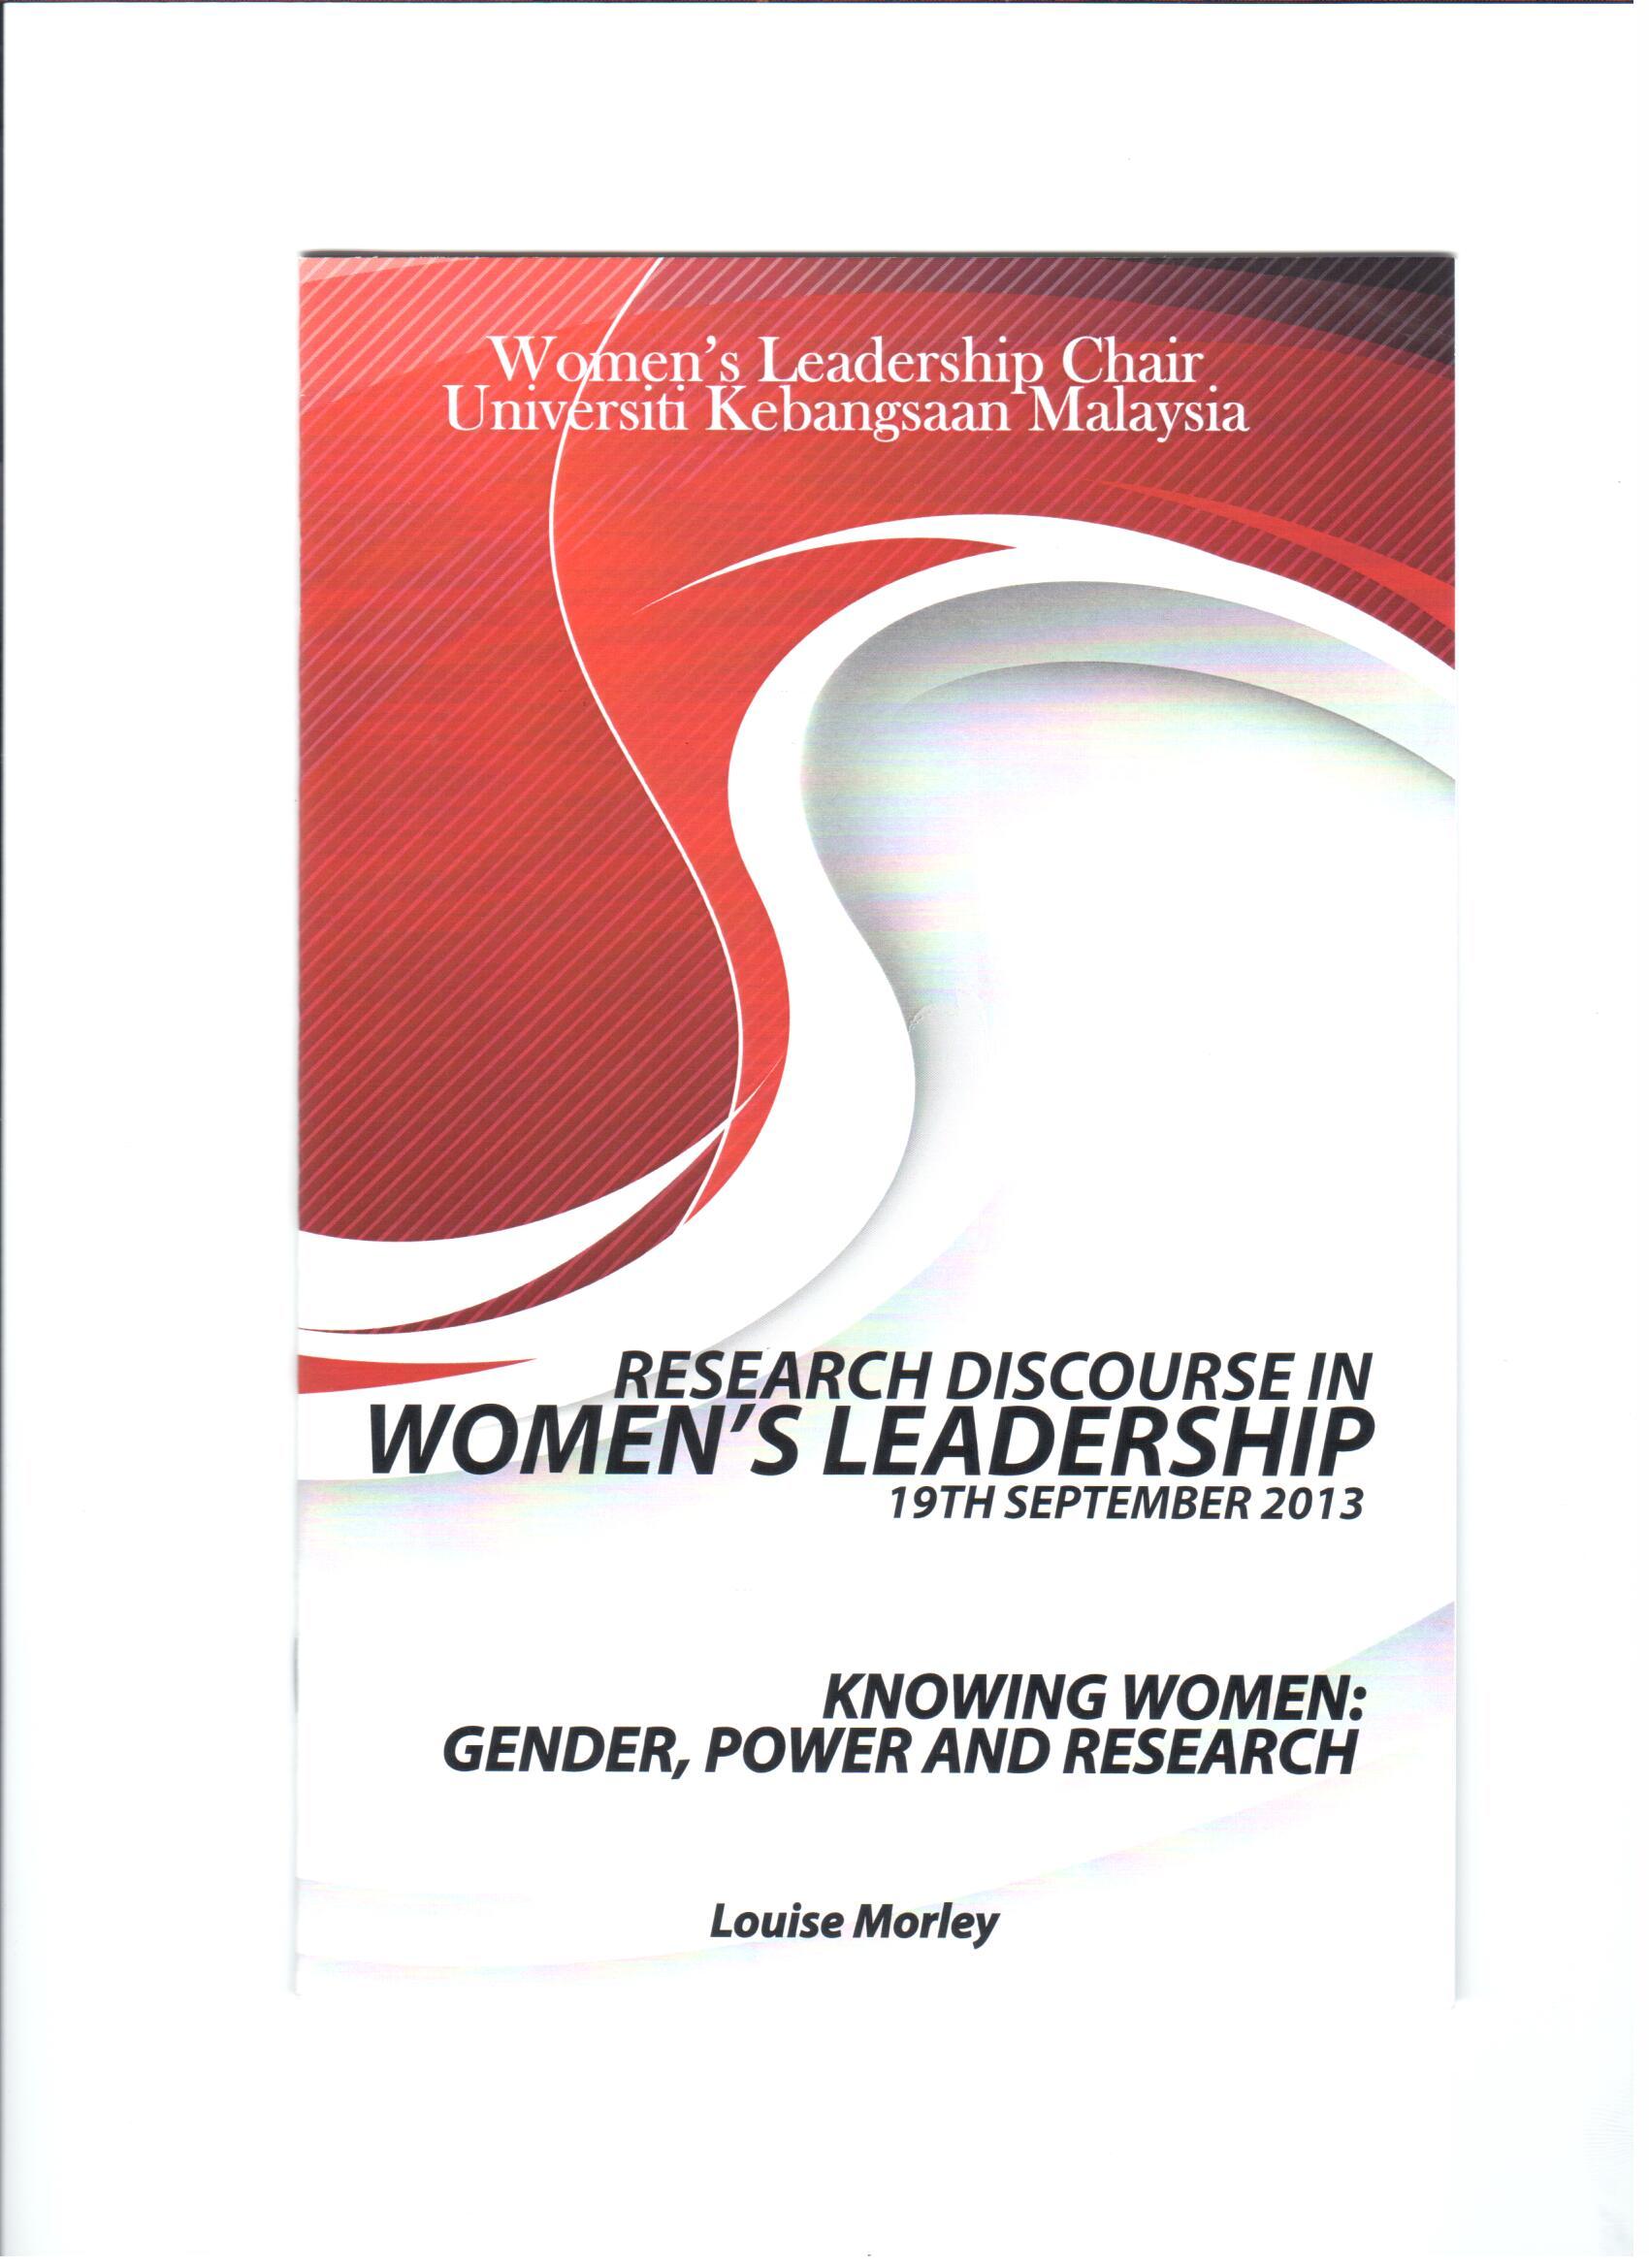 Knowing Women: Gender, Power and Research